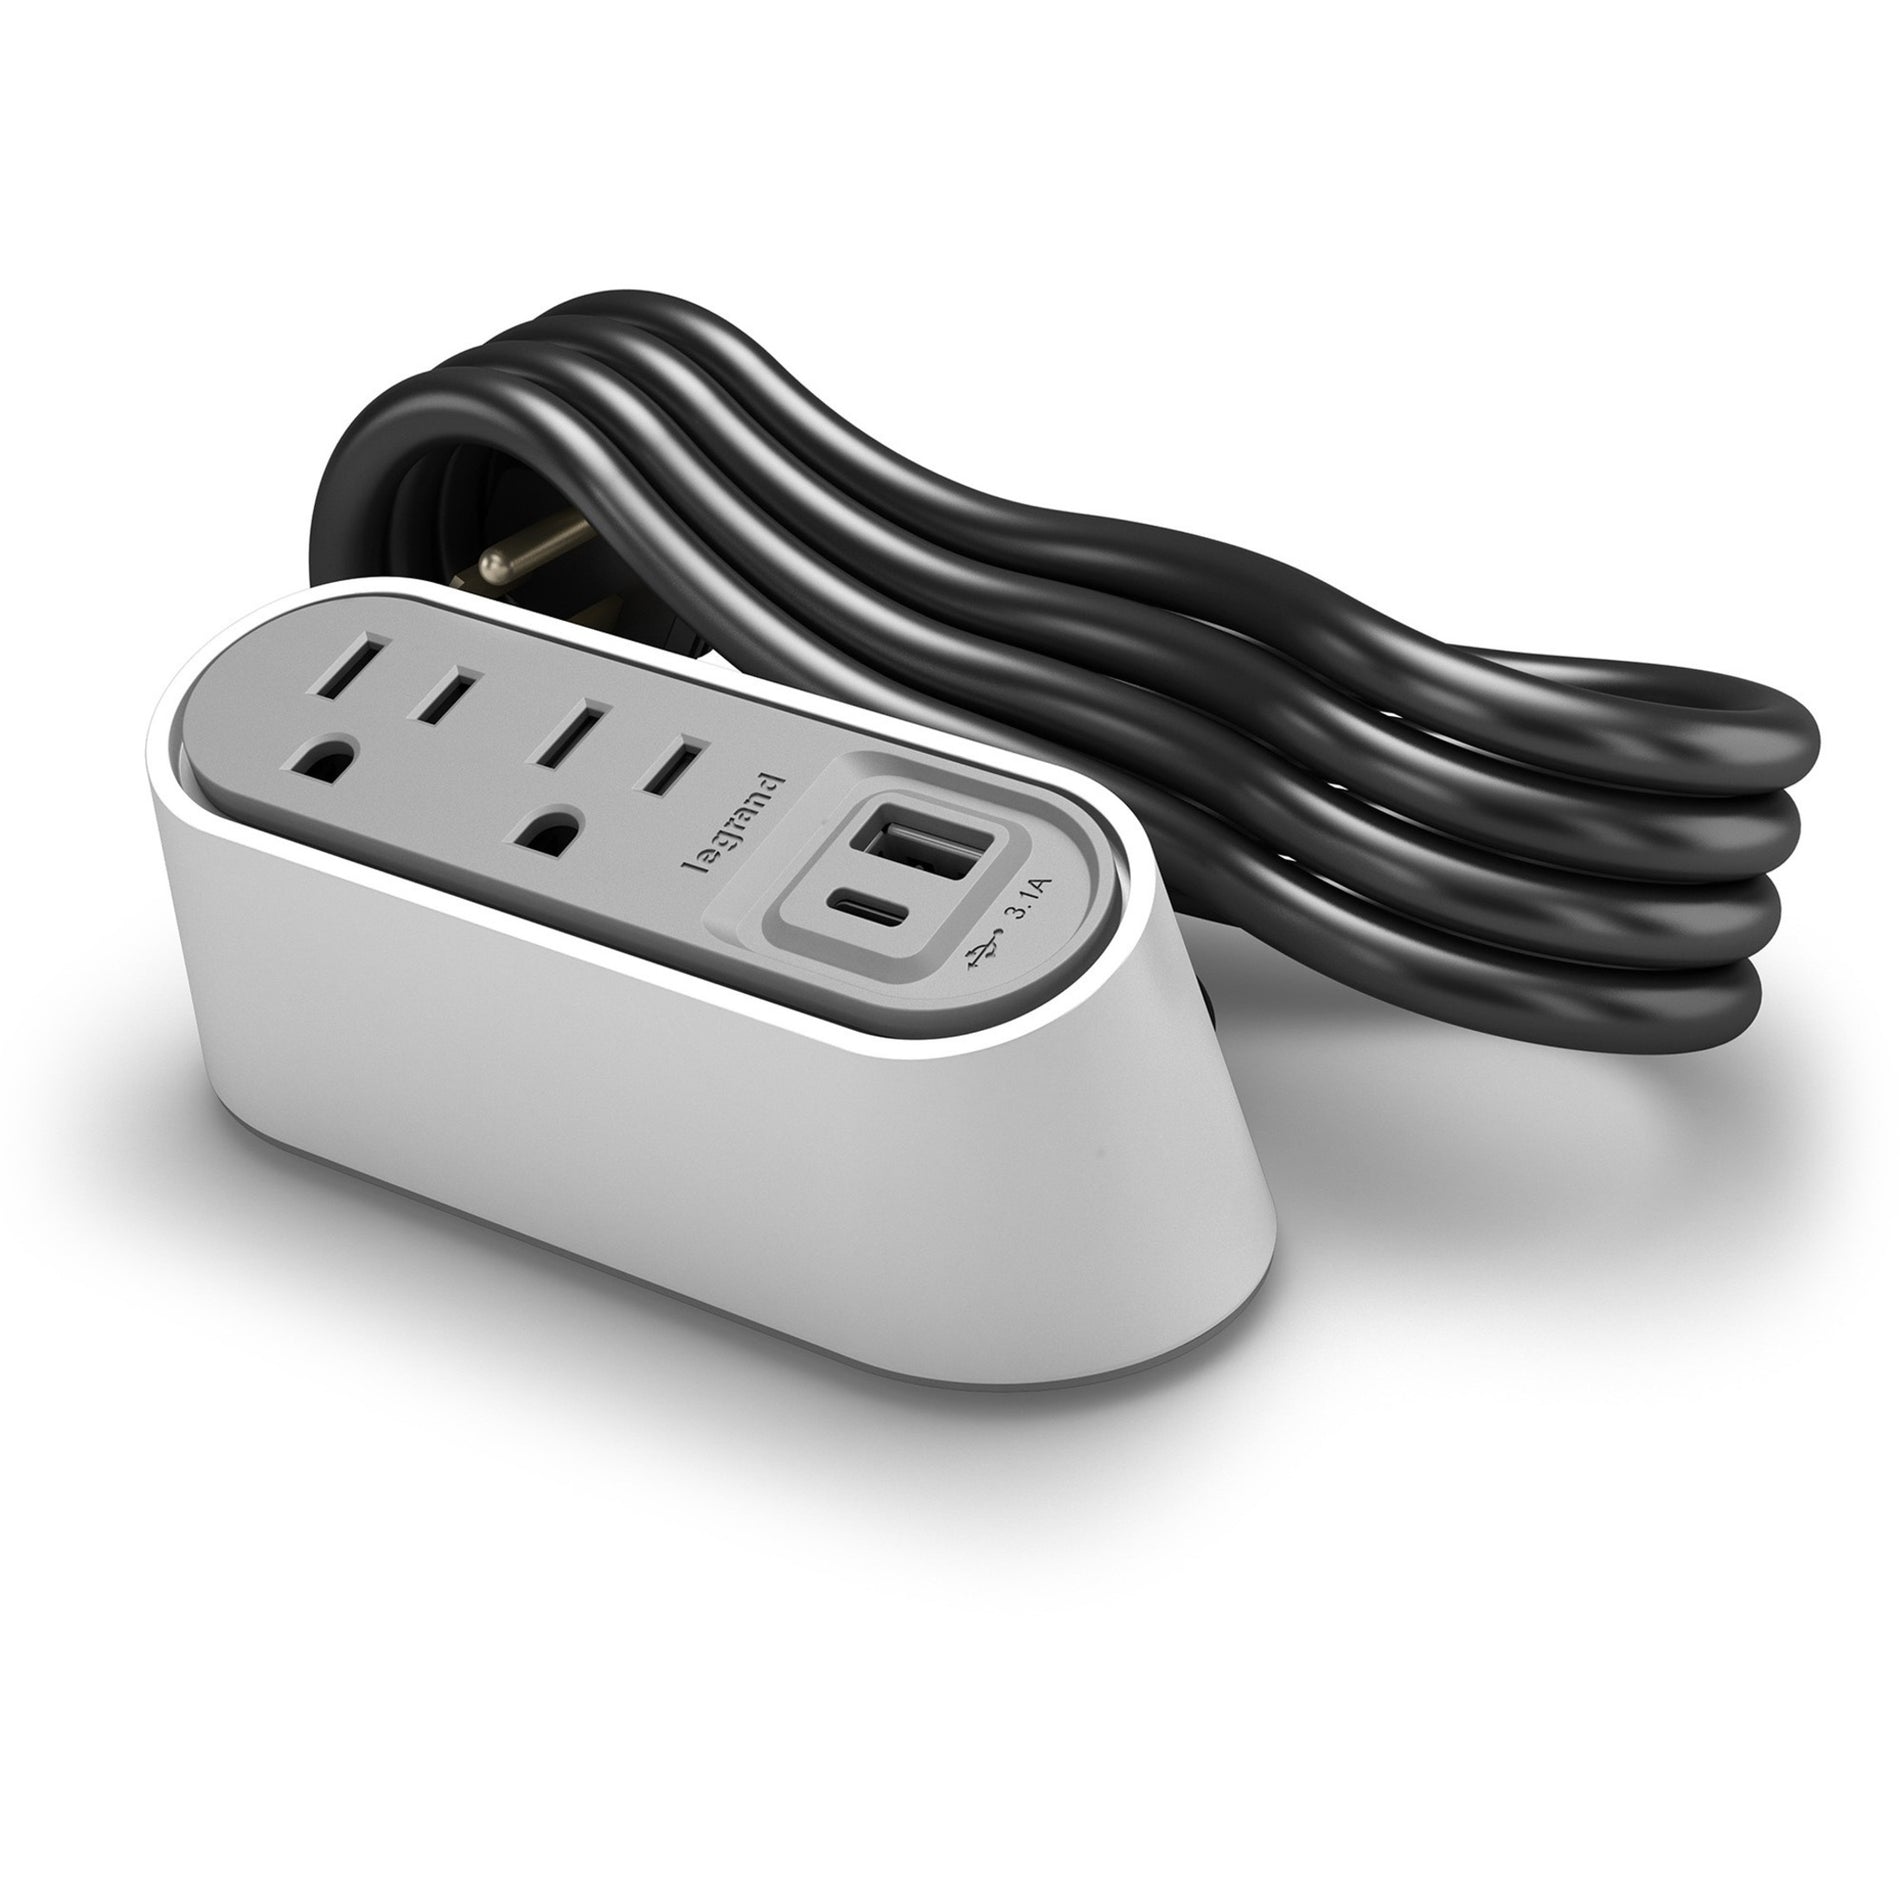 Chief WSPC220CWH Desktop Power Center, 2 AC Power Outlets, 2 USB Ports, White